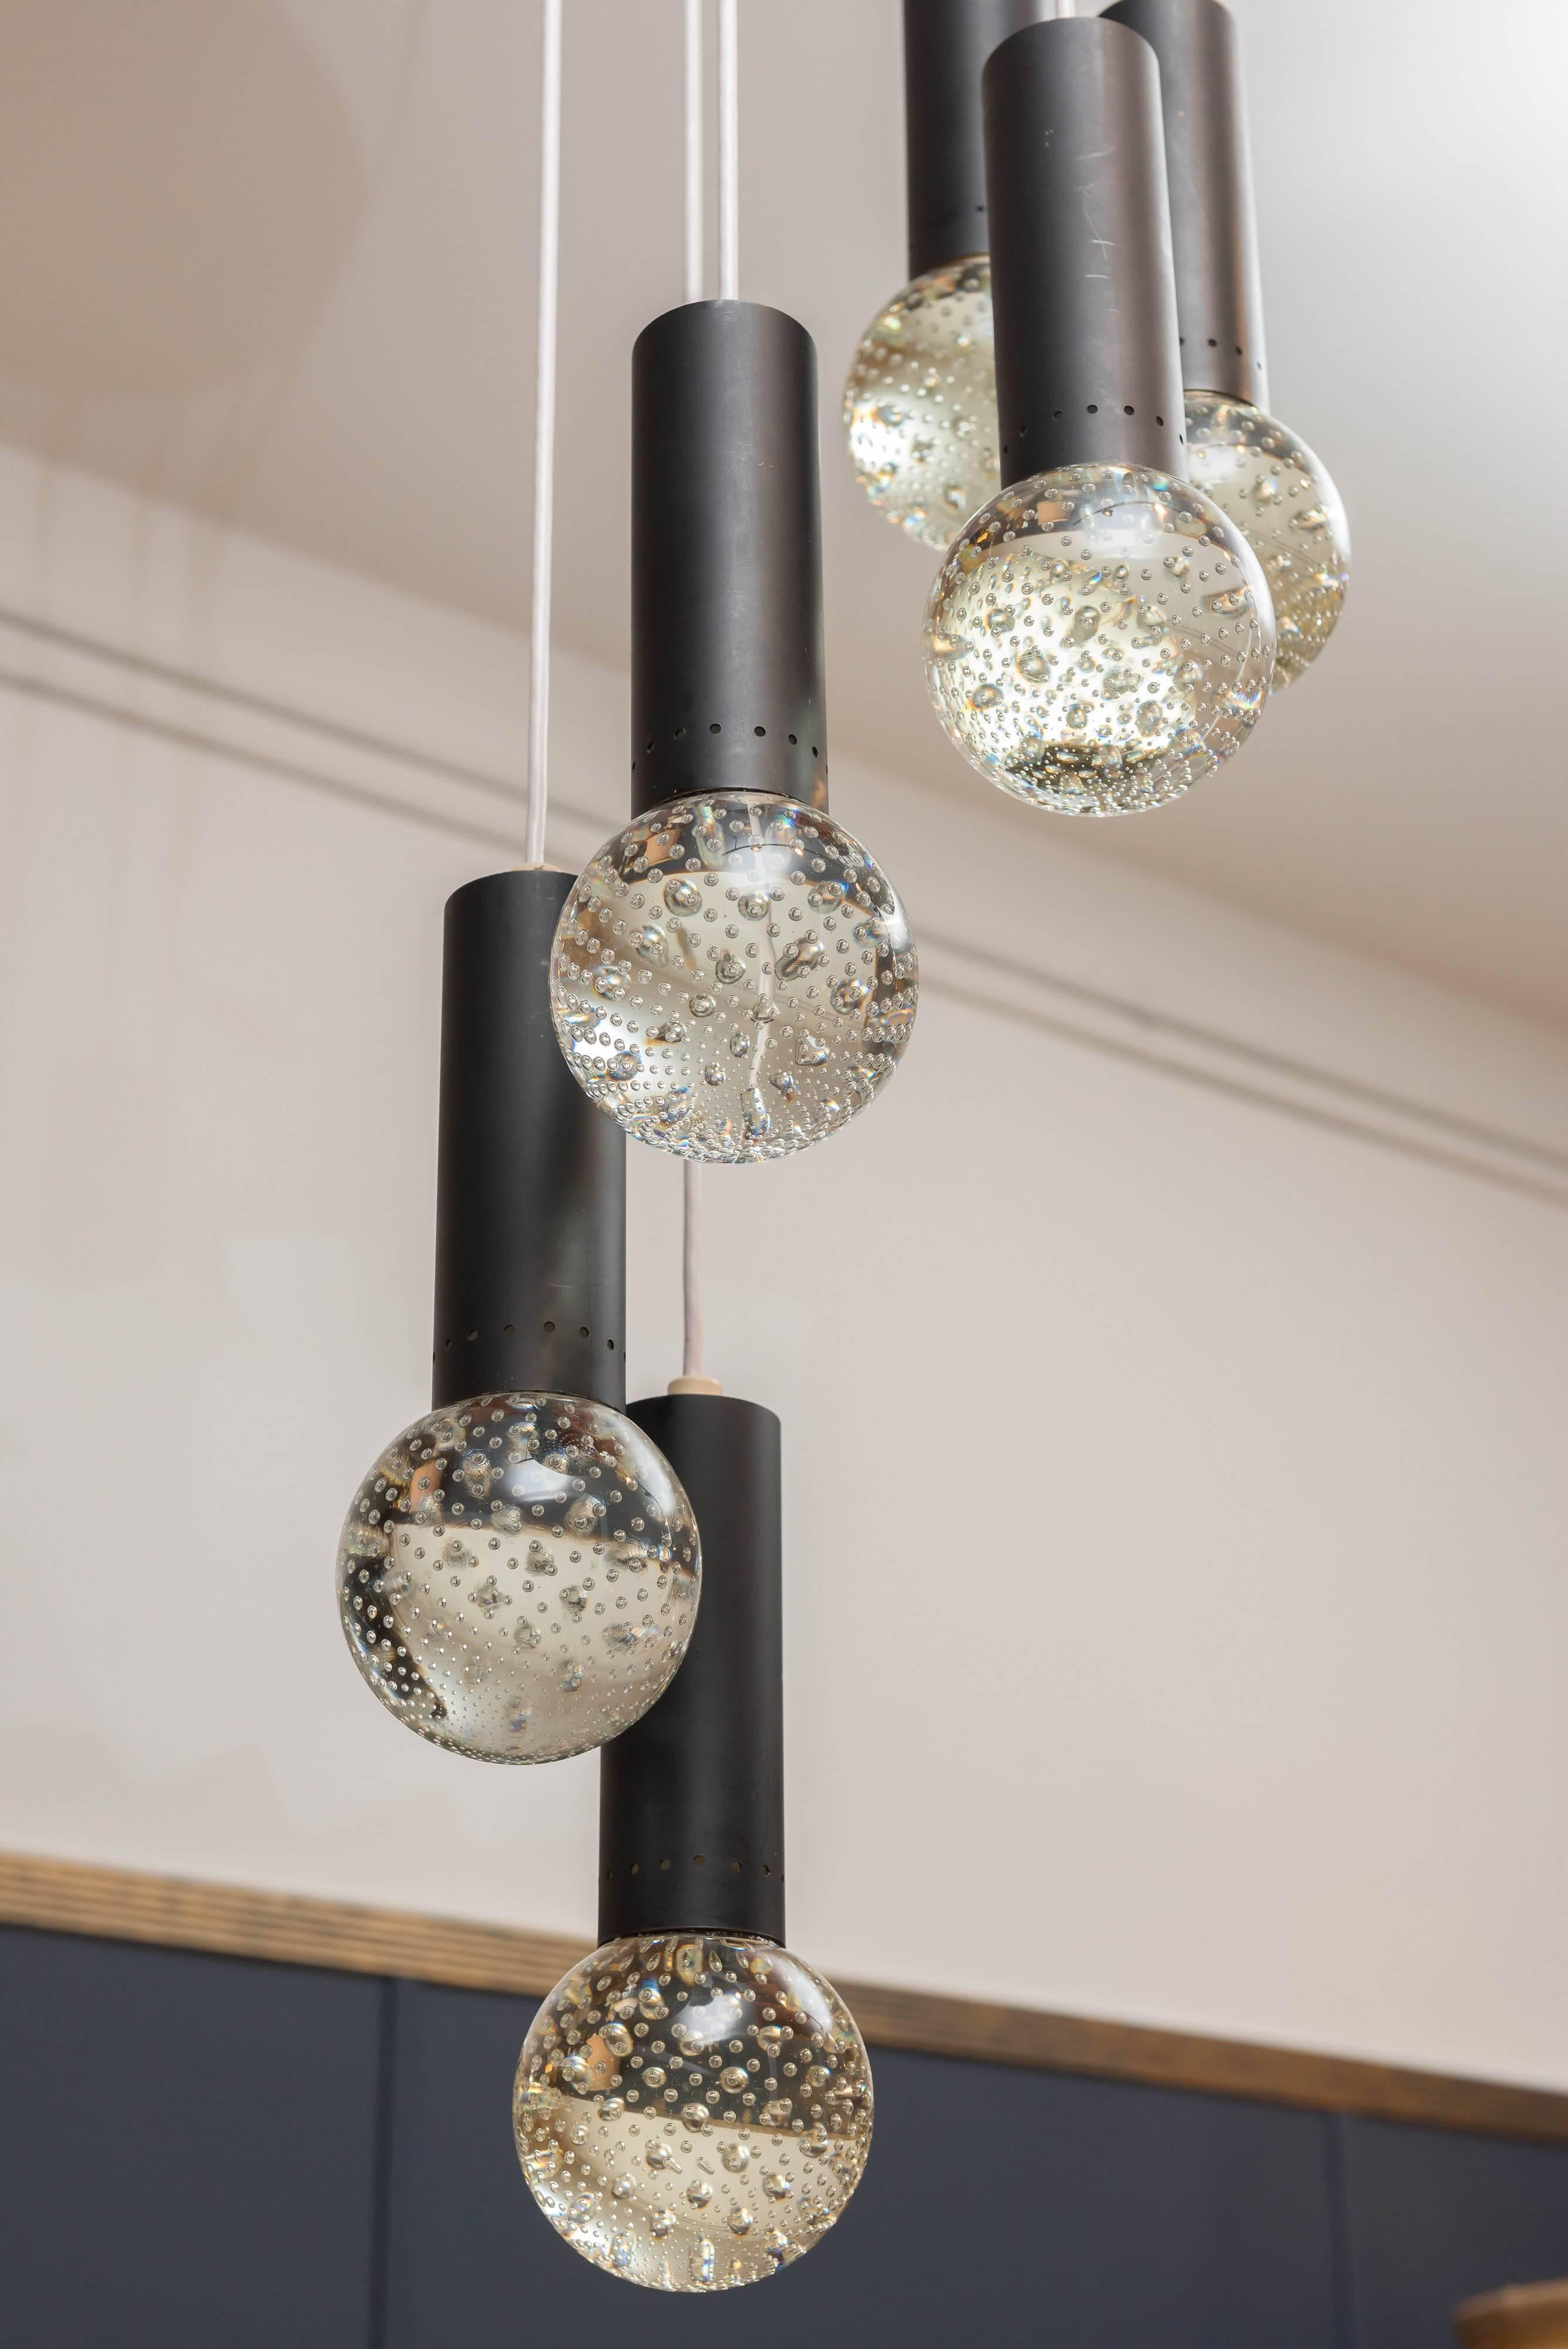 Mid-20th Century Bubble Light Chandelier in the style of Gino Sarfatti